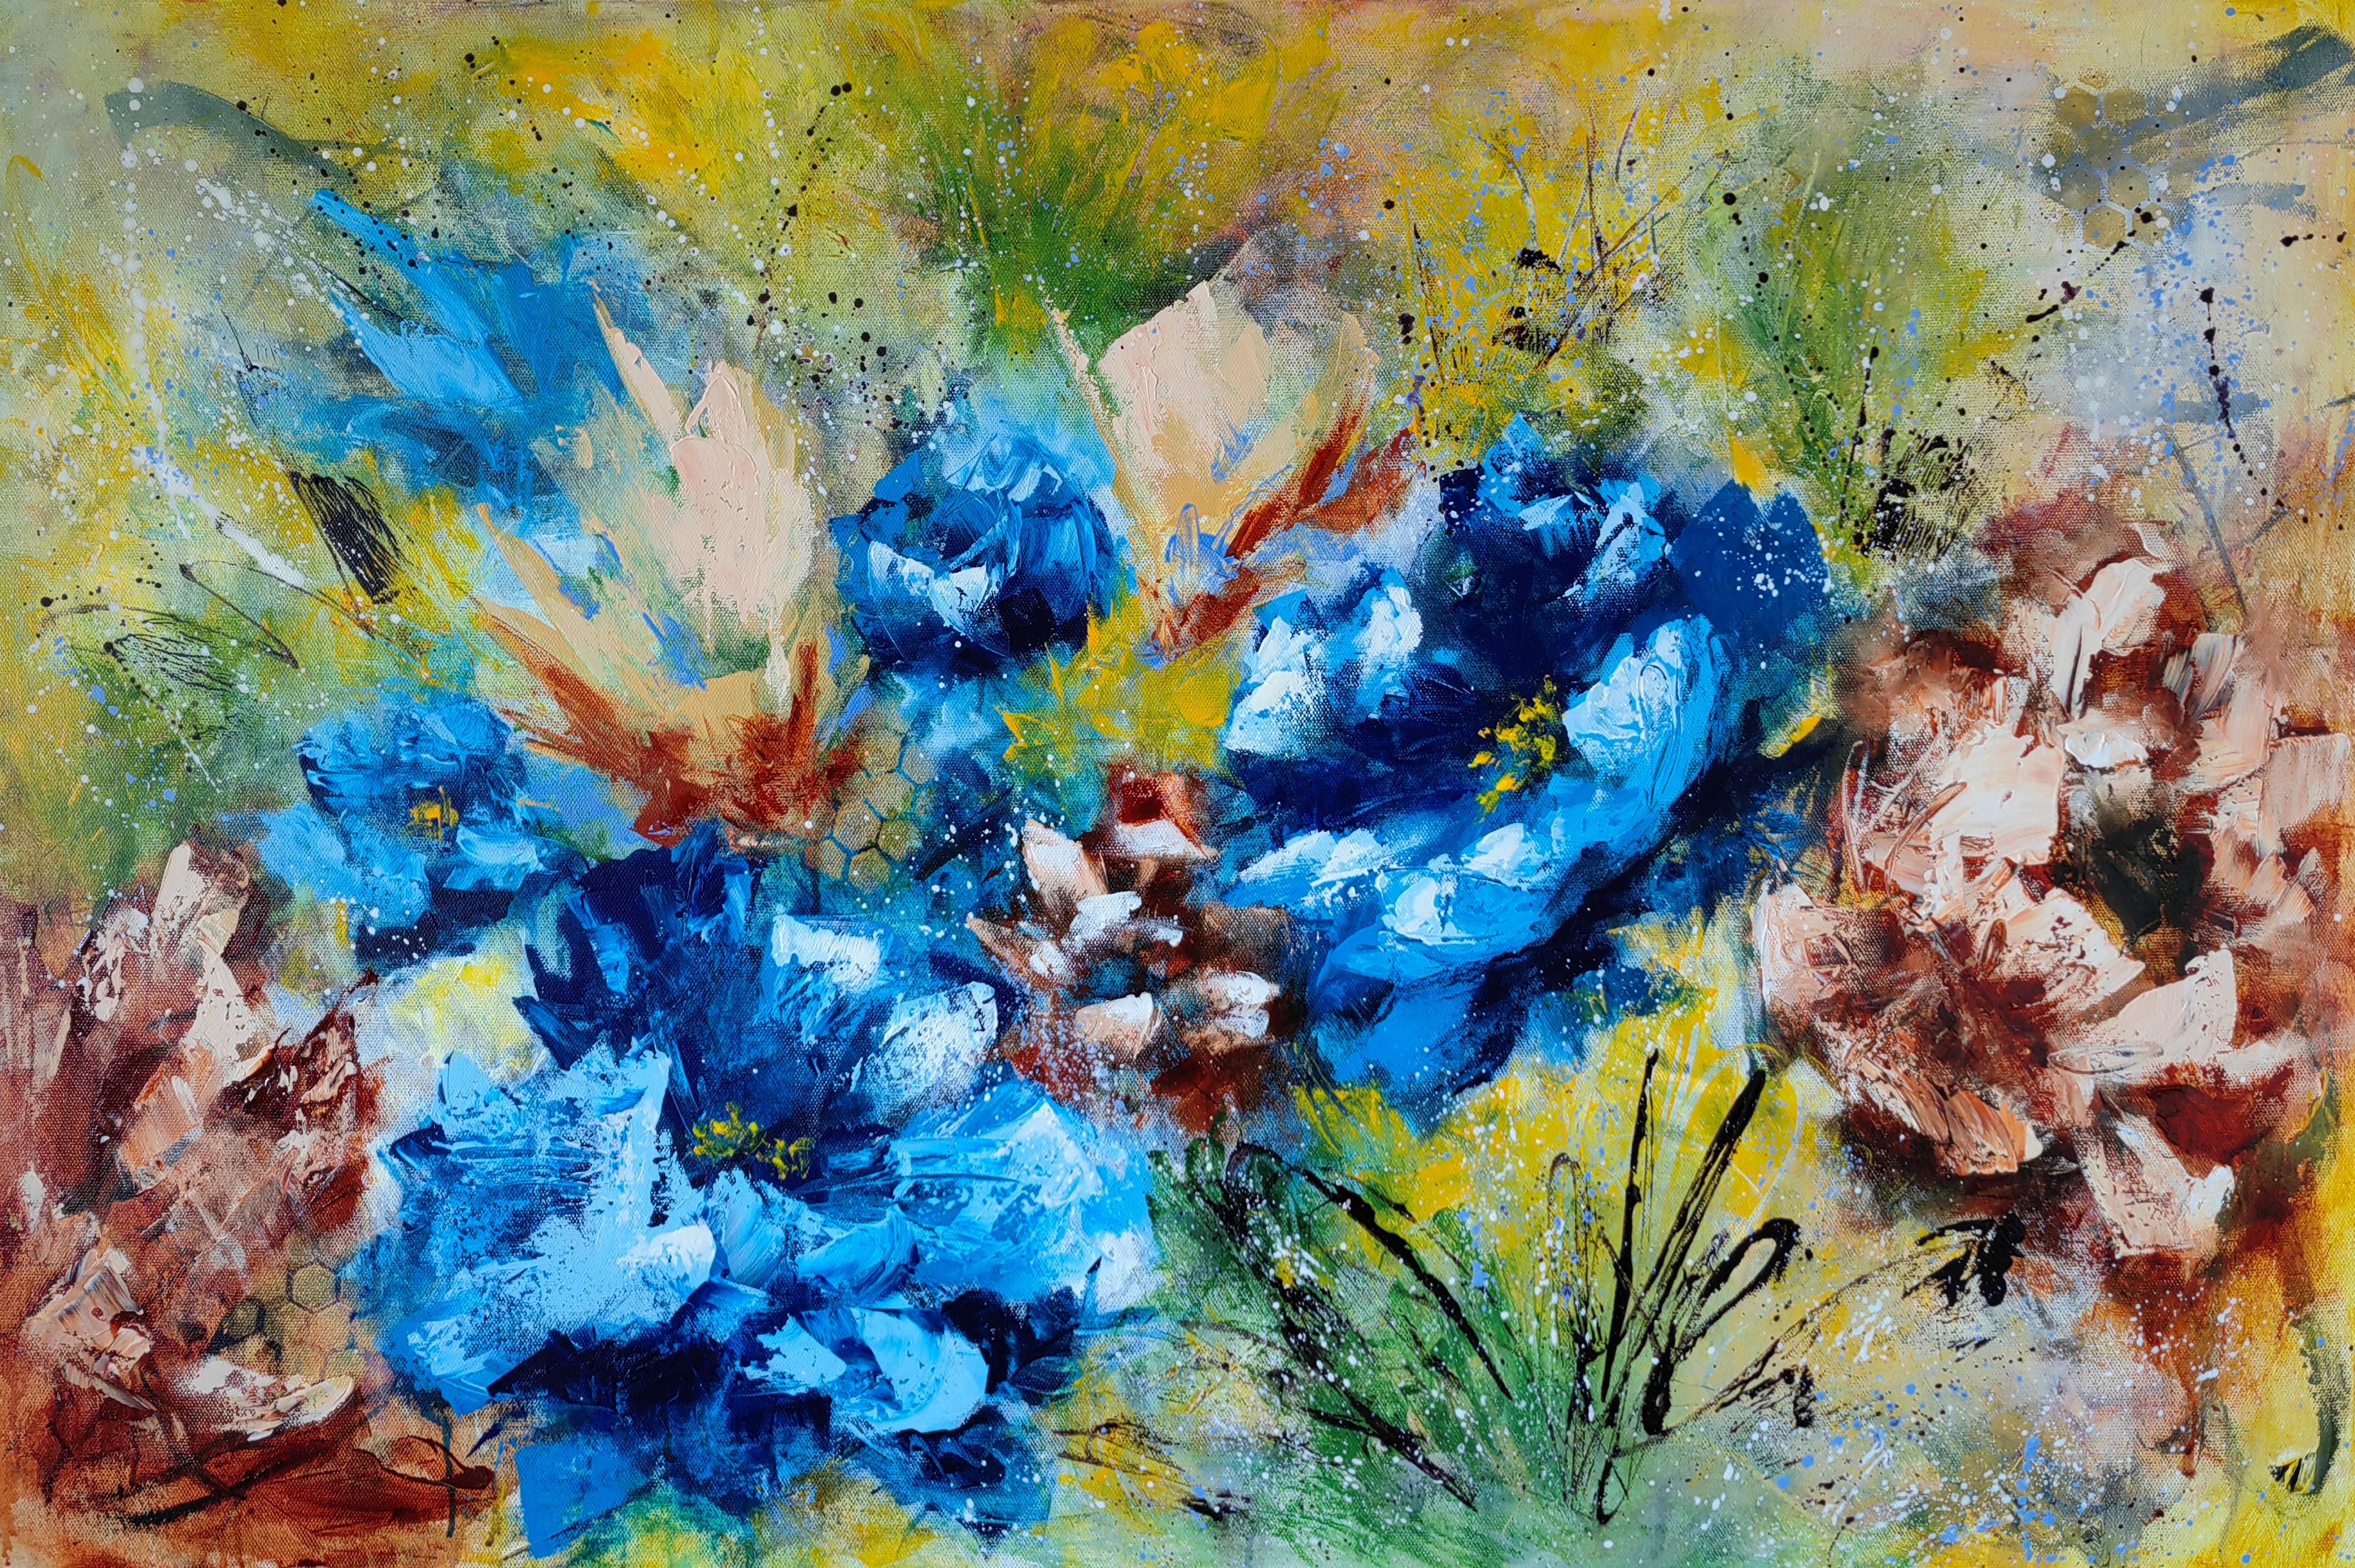 Vera Hoi Interior Painting - "Dance of the Flowers" from "Colours of Summer" collection, XL abstract floral